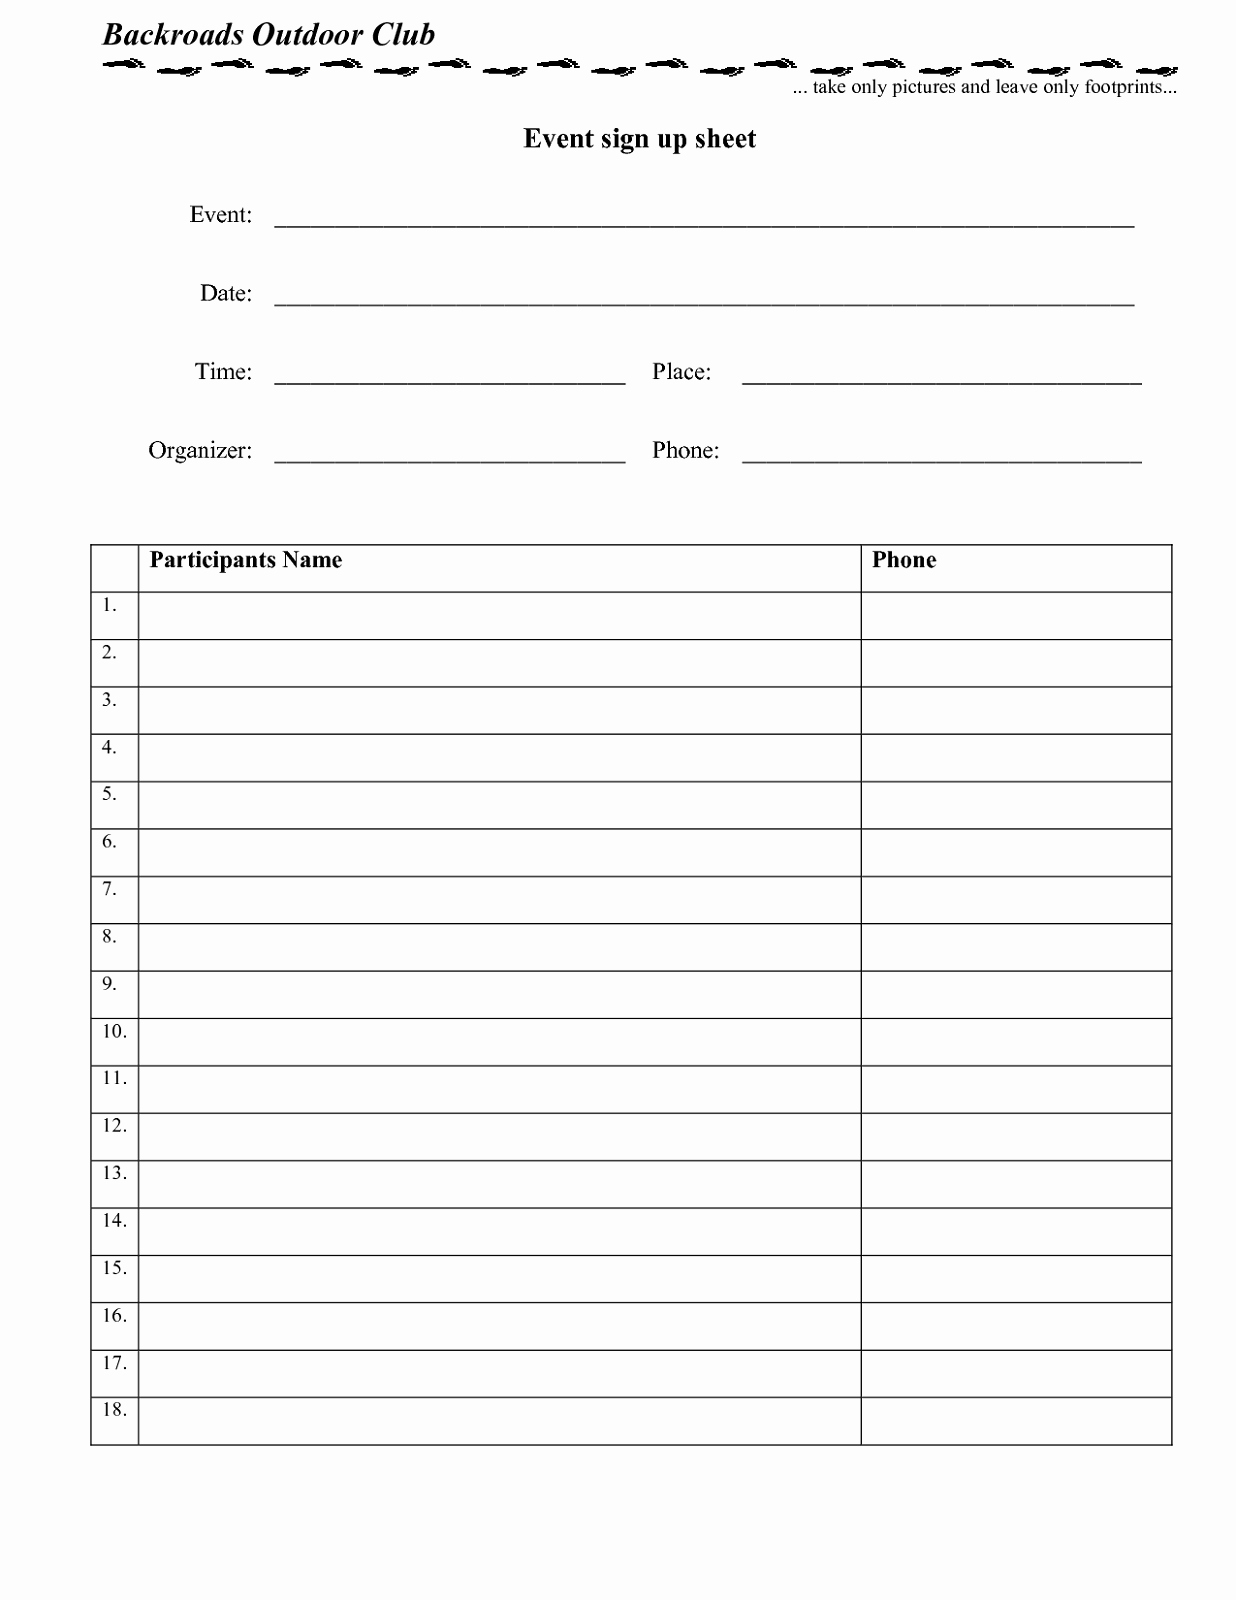 Sign Up Sheets for events New Potluck Sign Up Sheet Word for events